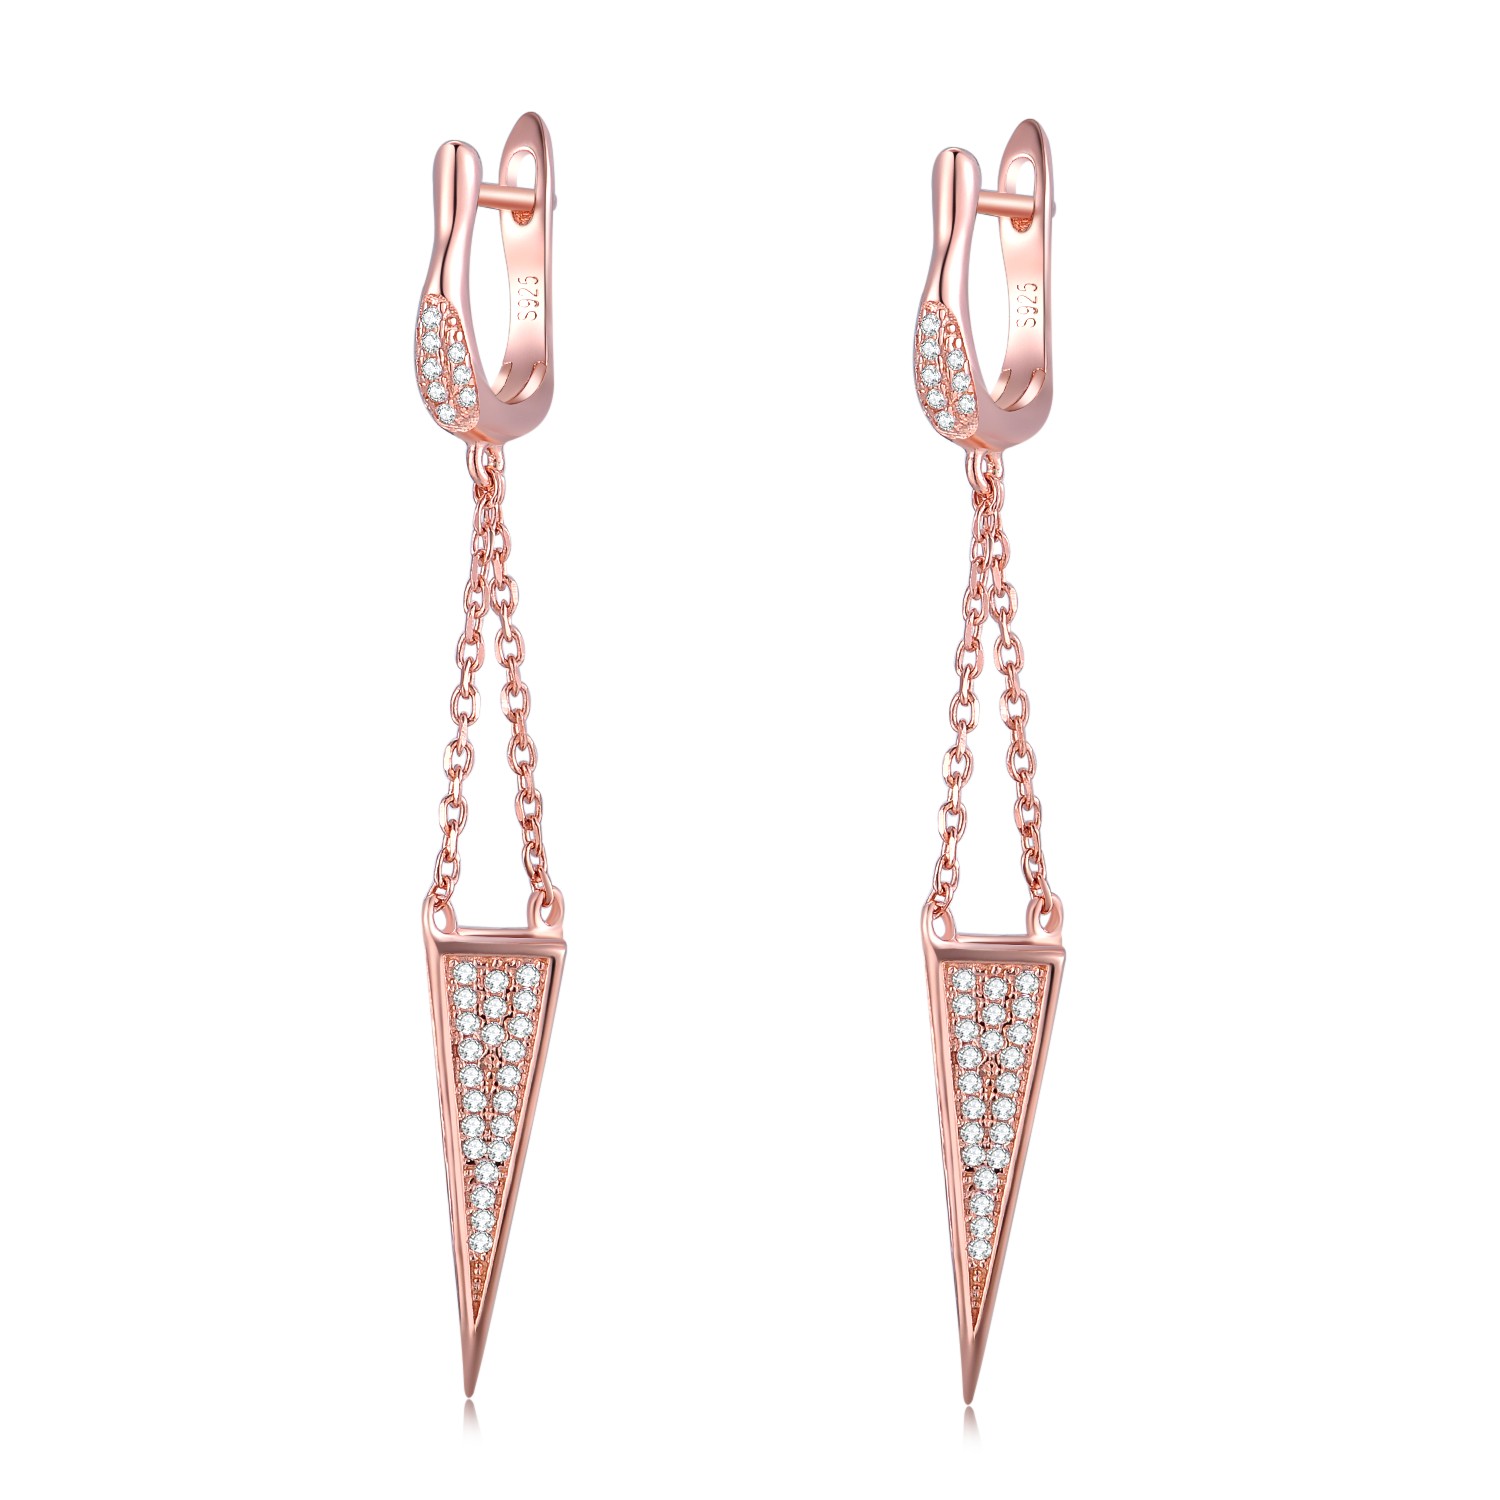 Wholesale Vendor Jewelry Earrings 925 Sterling Silver Rose Gold Plated Triangle Shape Drop Earring